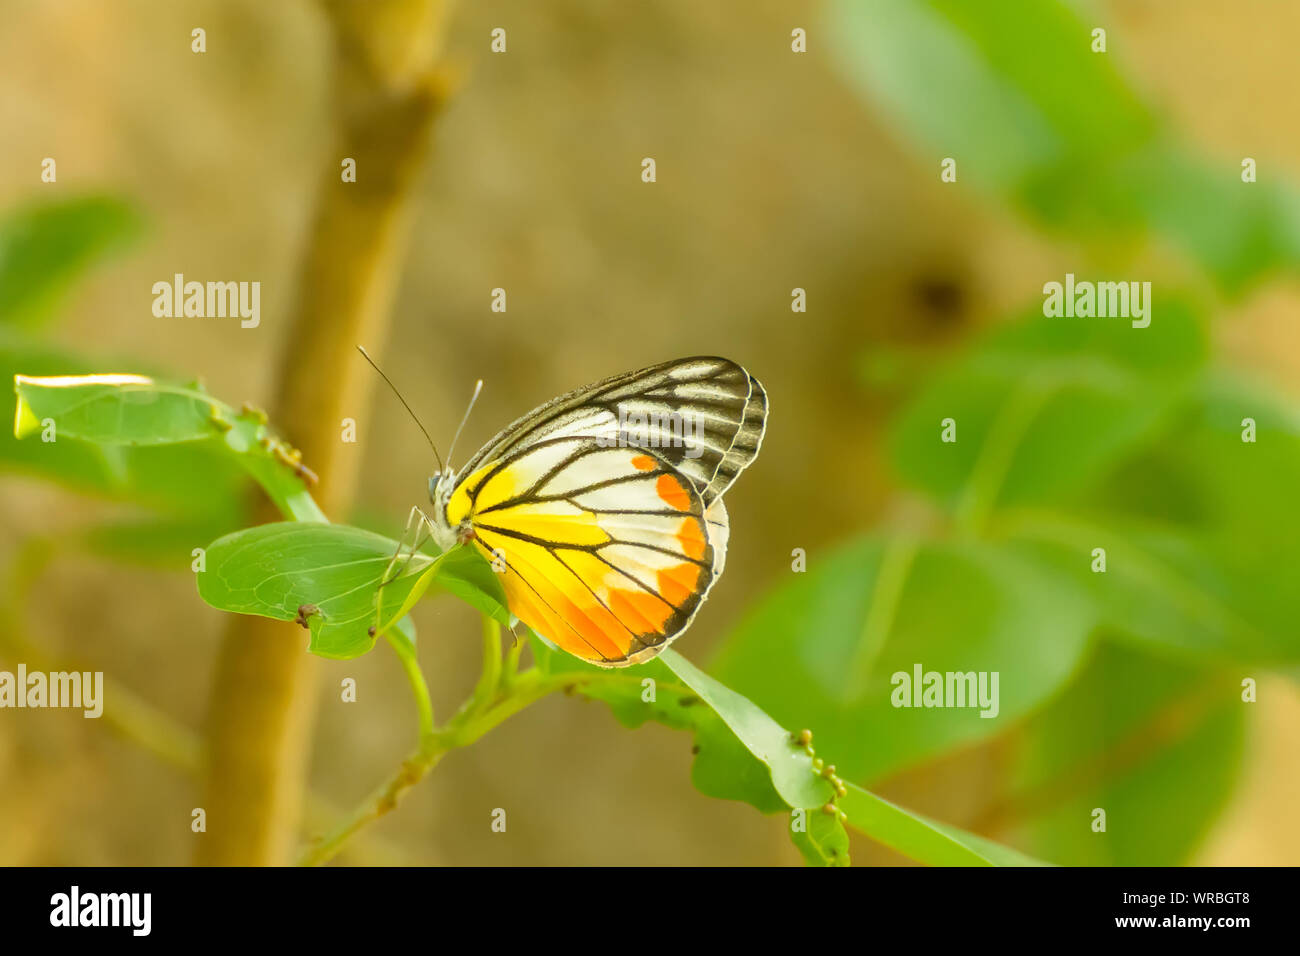 Butterfly in nuture, its makes a refreshing feeling. Stock Photo